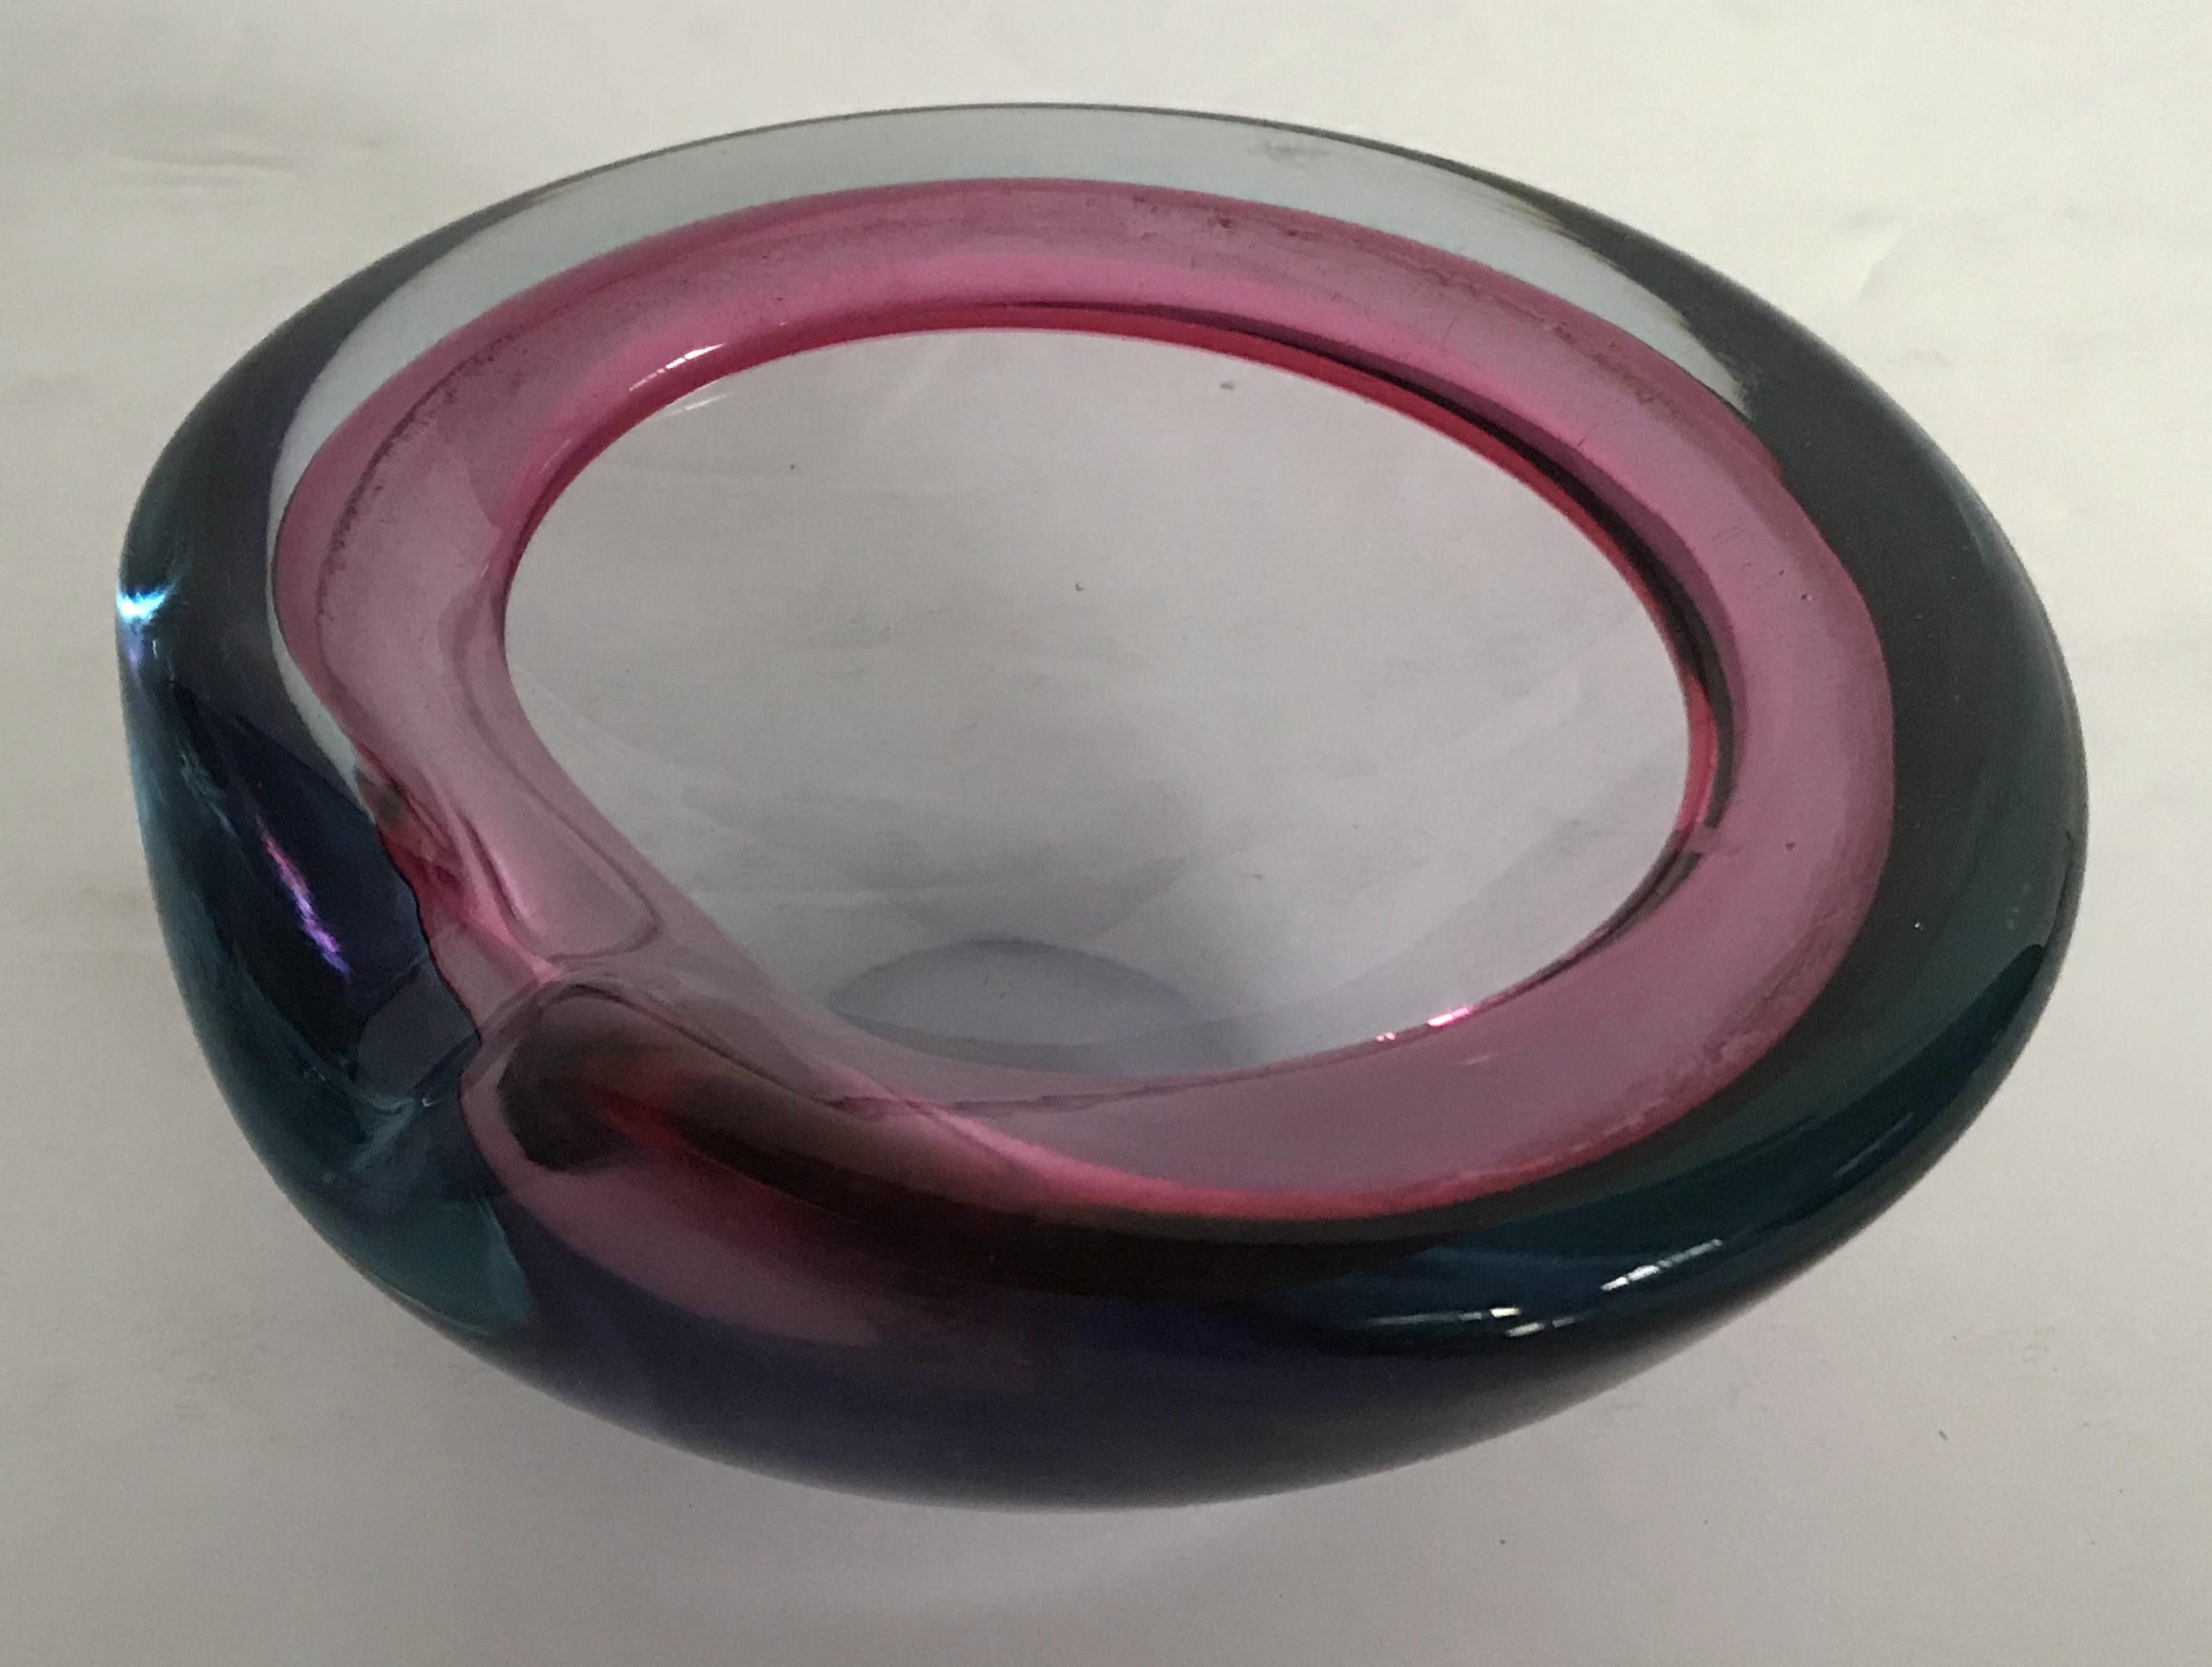 Vintage pink and blue Murano glass ashtray or candy bowl / Made in Italy, circa 1960s 
Measures: width 5 inches, depth 4.5 inches, height 2 inches 
1 in stock in Palm Springs ON 50% OFF SALE for $399 !!
Order Reference #: FABIOLTD G196
This piece